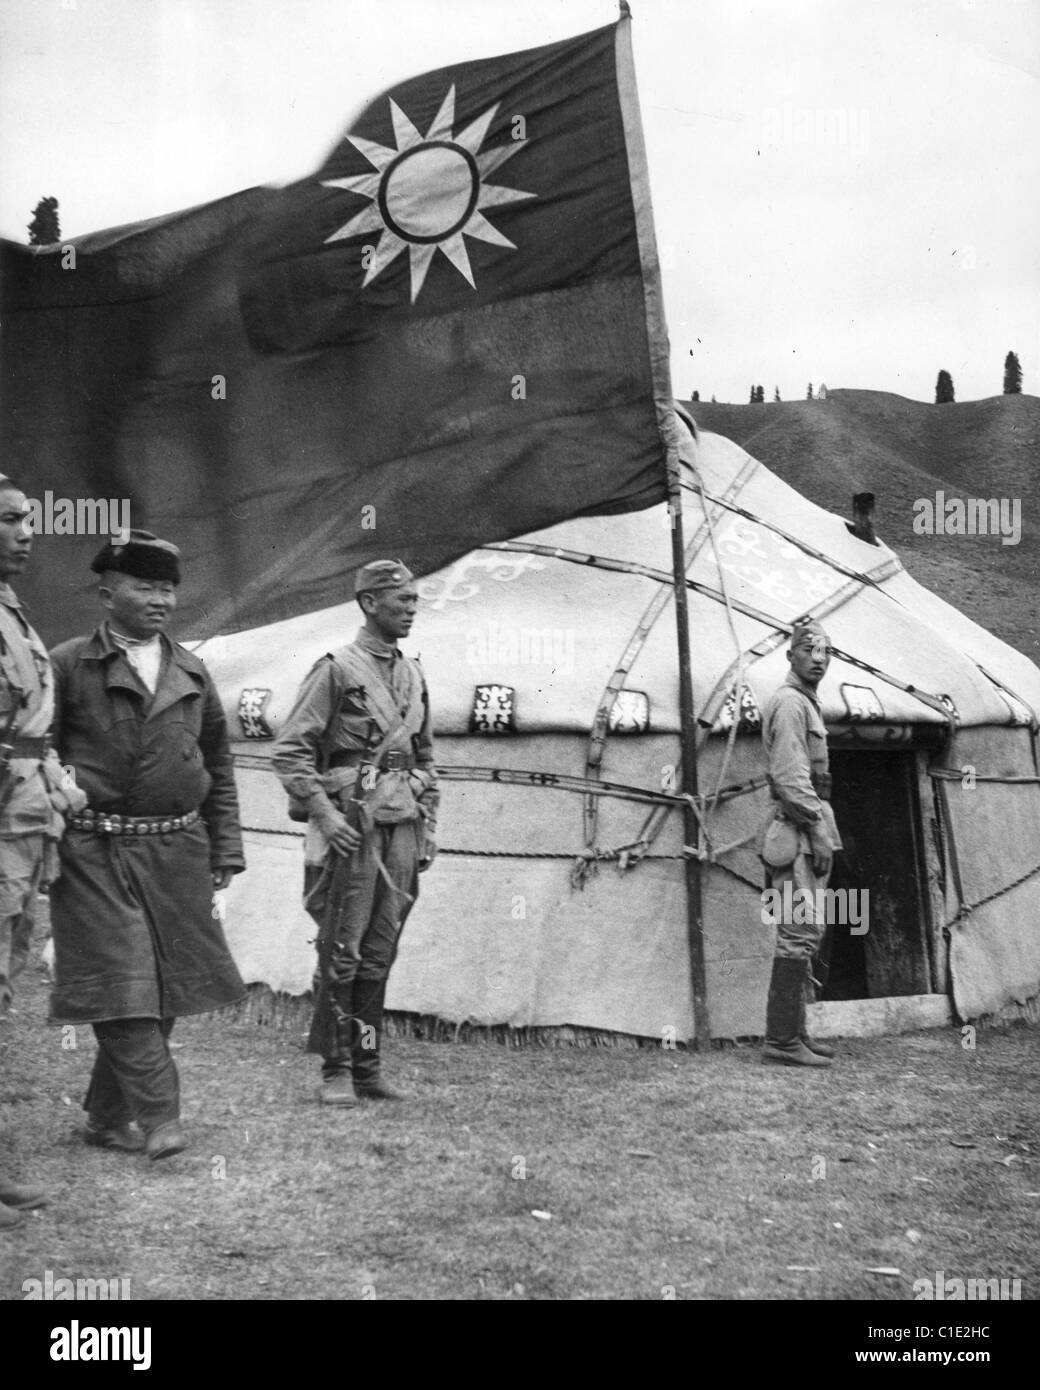 SINO-JAPANESE WAR Chinese army leaders meet with Kazakhs inside a yurt with the Nationalist flag flying outside - about 1940 Stock Photo